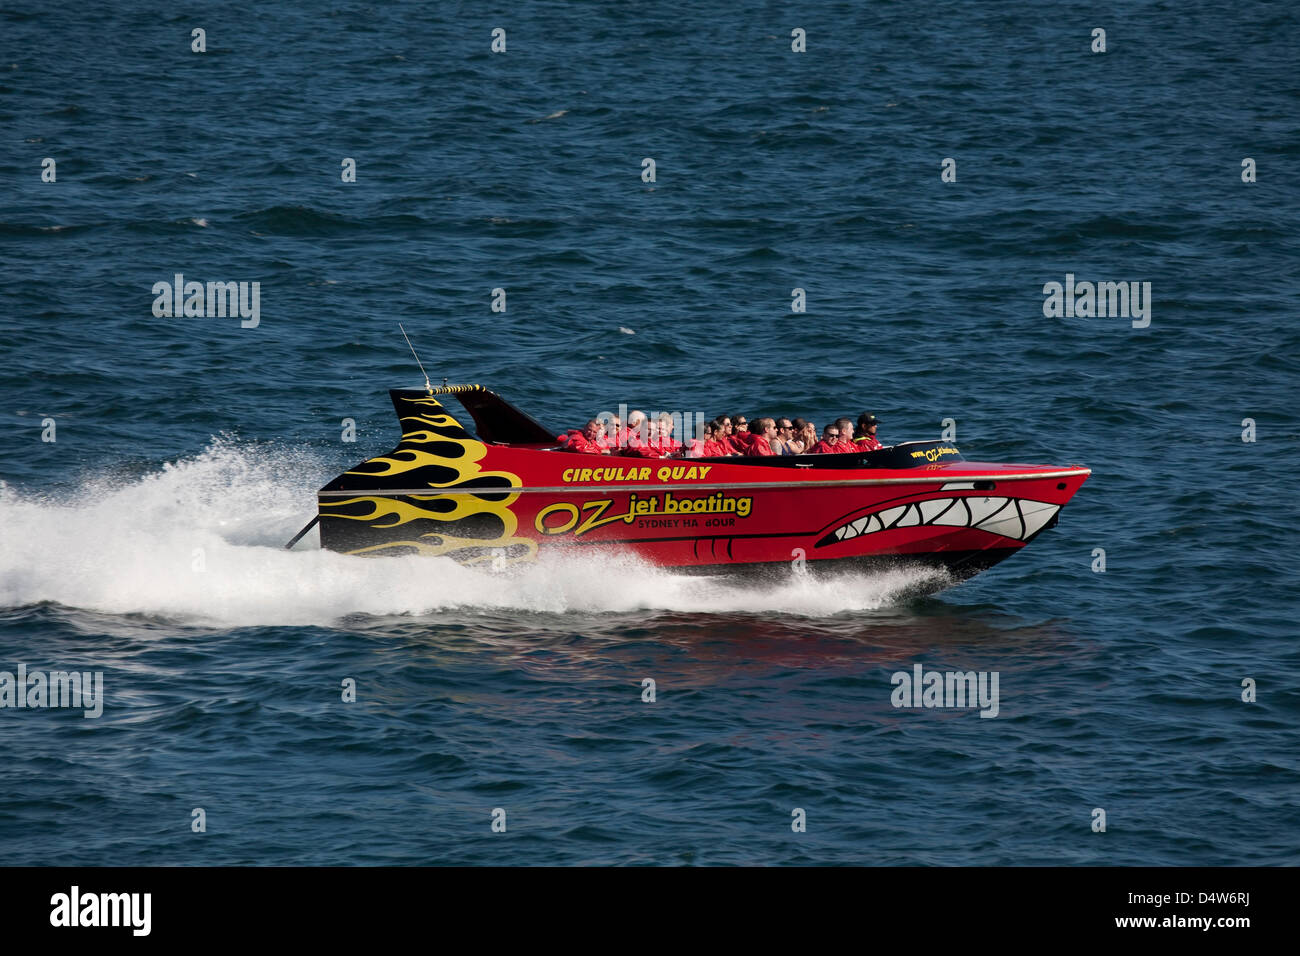 Oz jet boating tourists at high-speed across Sydney harbour Sydney New South Wales Australia Stock Photo